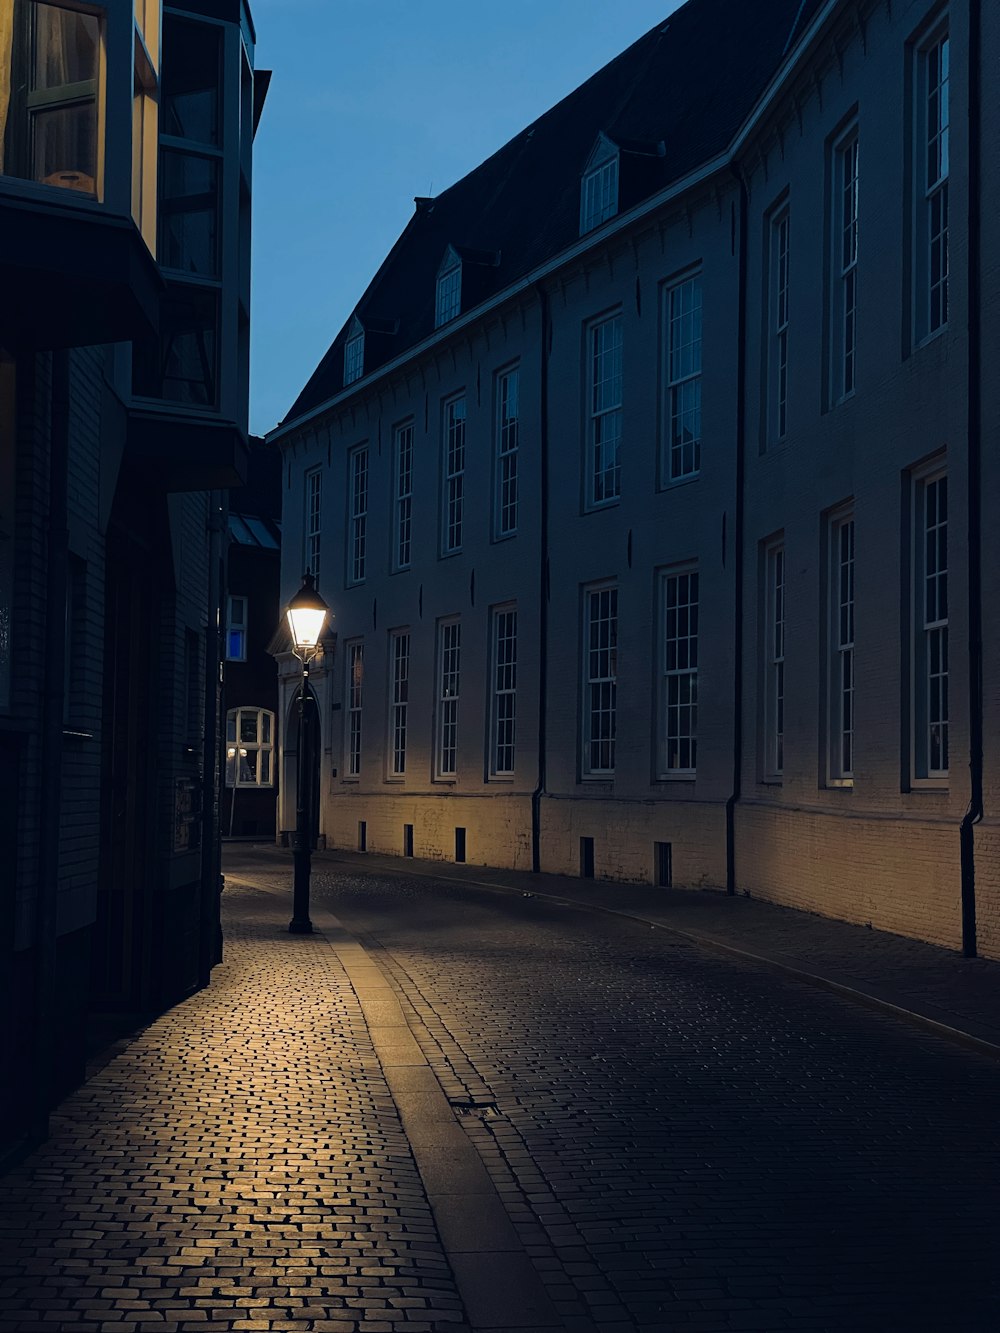 lighted street lamp on street during night time